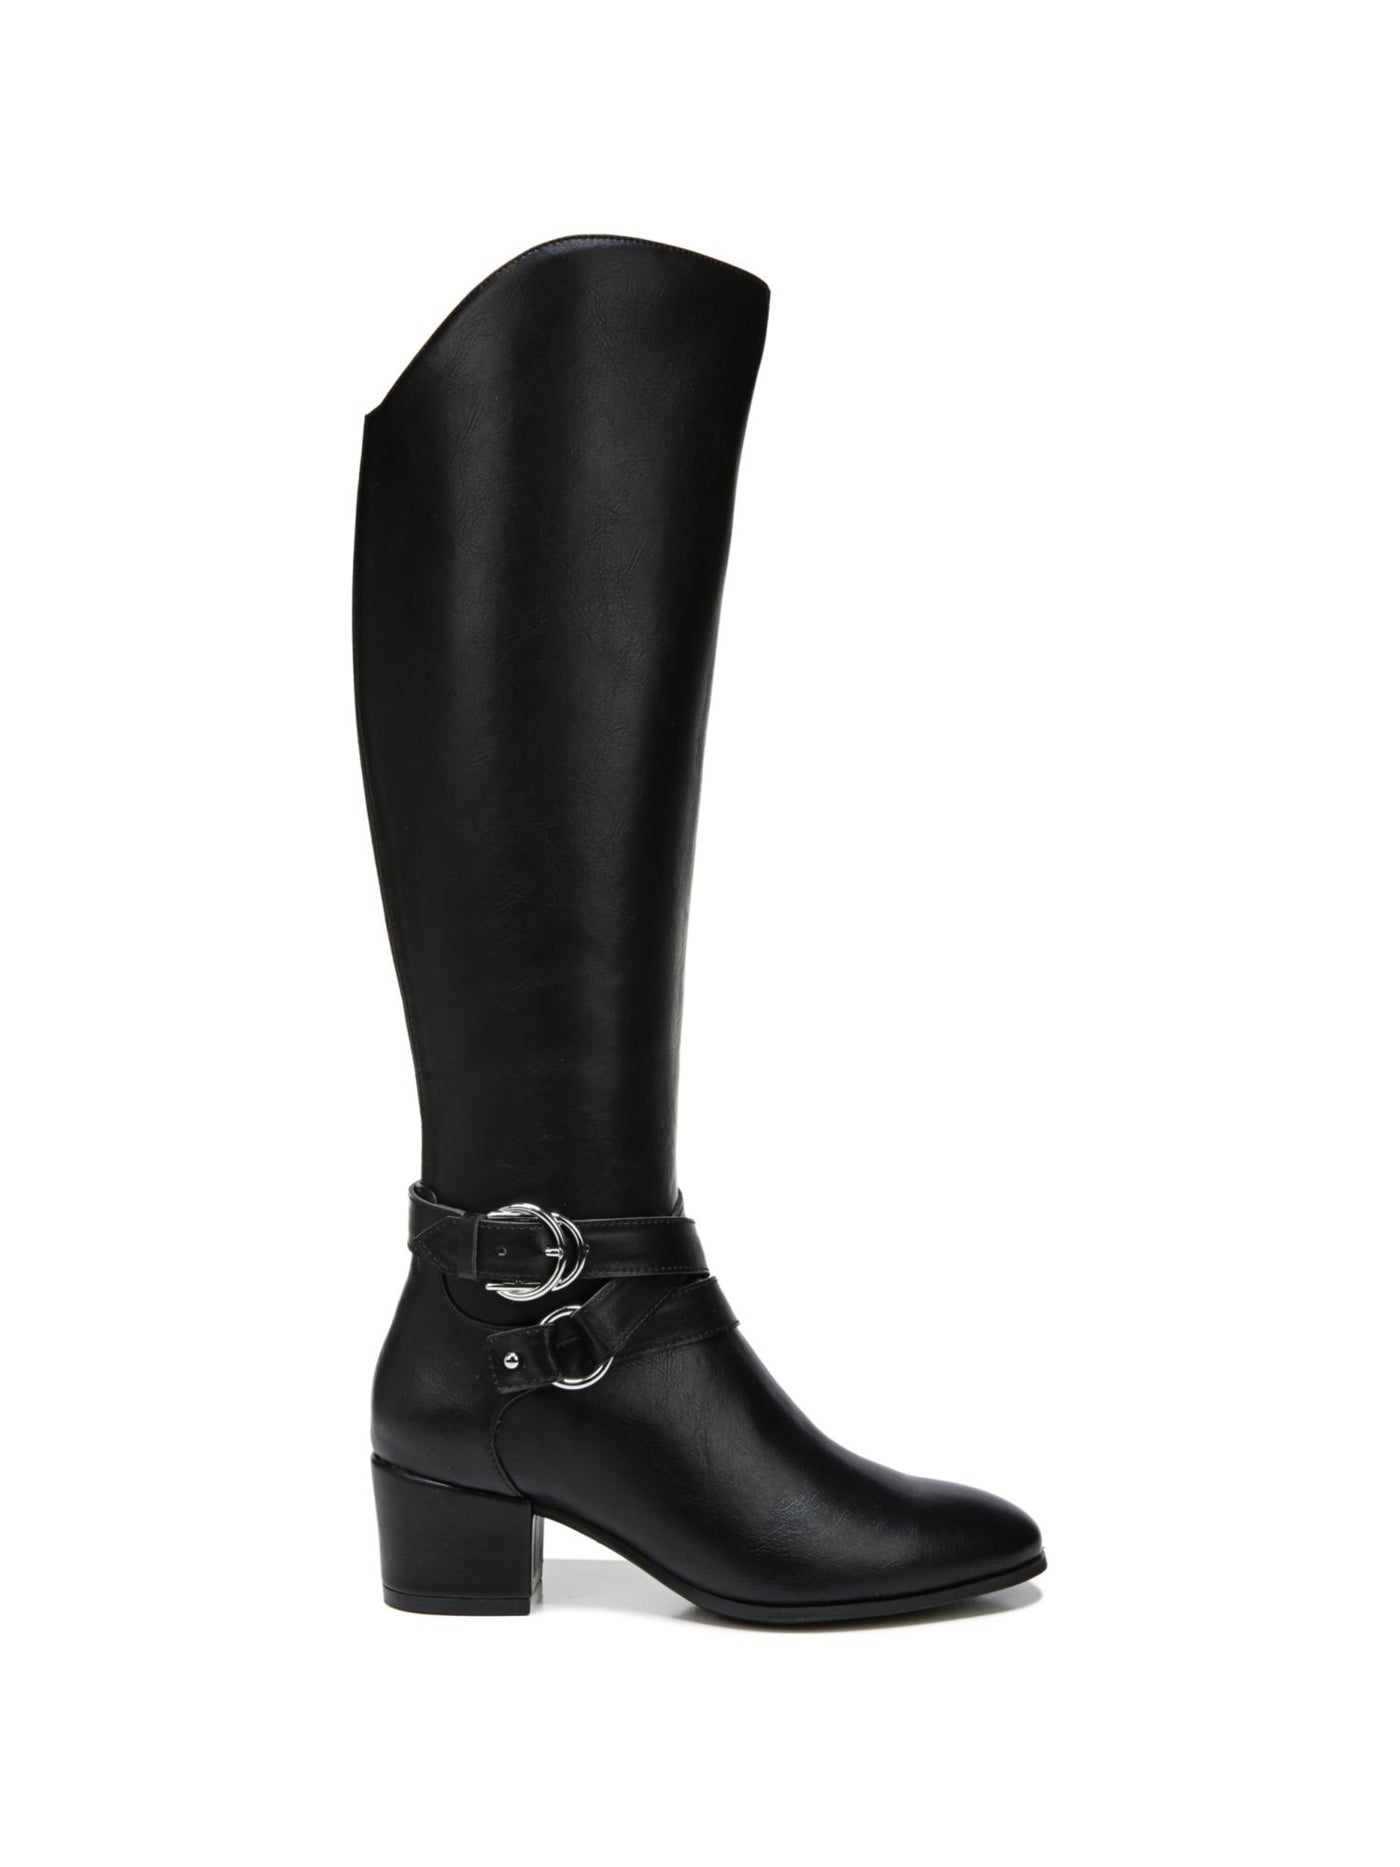 LIFE STRIDE VELOCITY Womens Black Buckle Accent Cushioned Slip Resistant Almond Toe Block Heel Zip-Up Heeled Boots 6.5